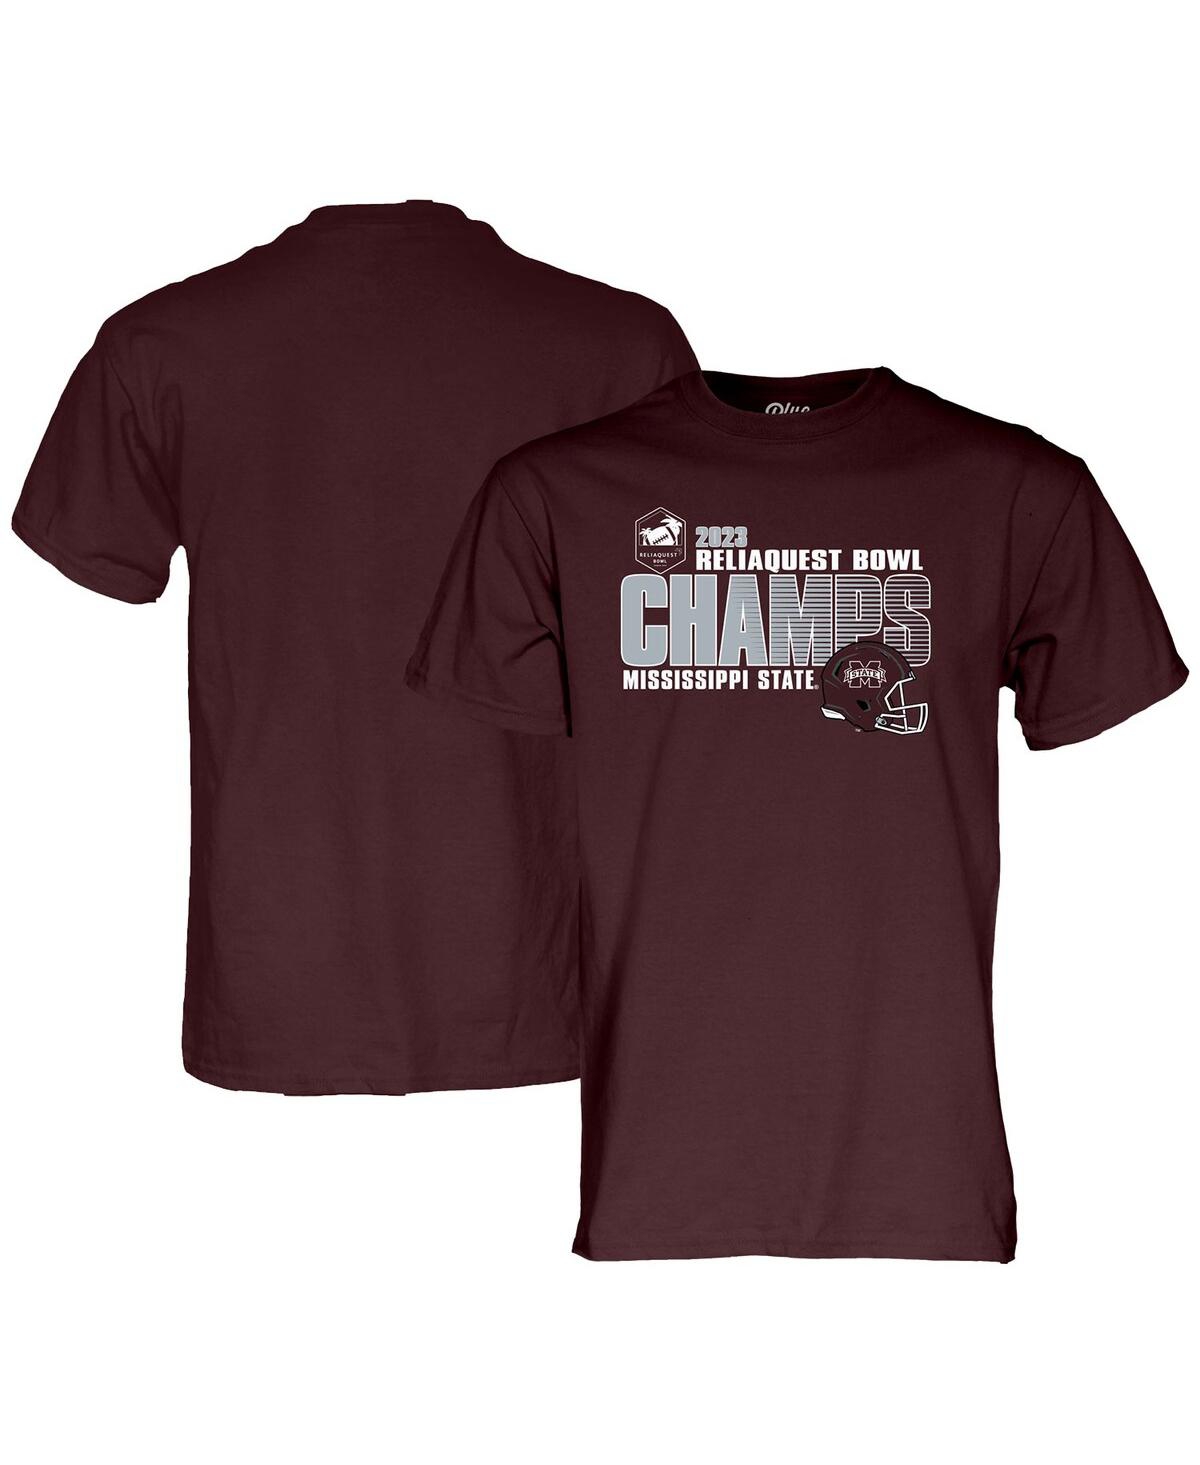 Men's Blue 84 Maroon Mississippi State Bulldogs 2023 ReliaQuest Bowl Champions T-shirt - Maroon